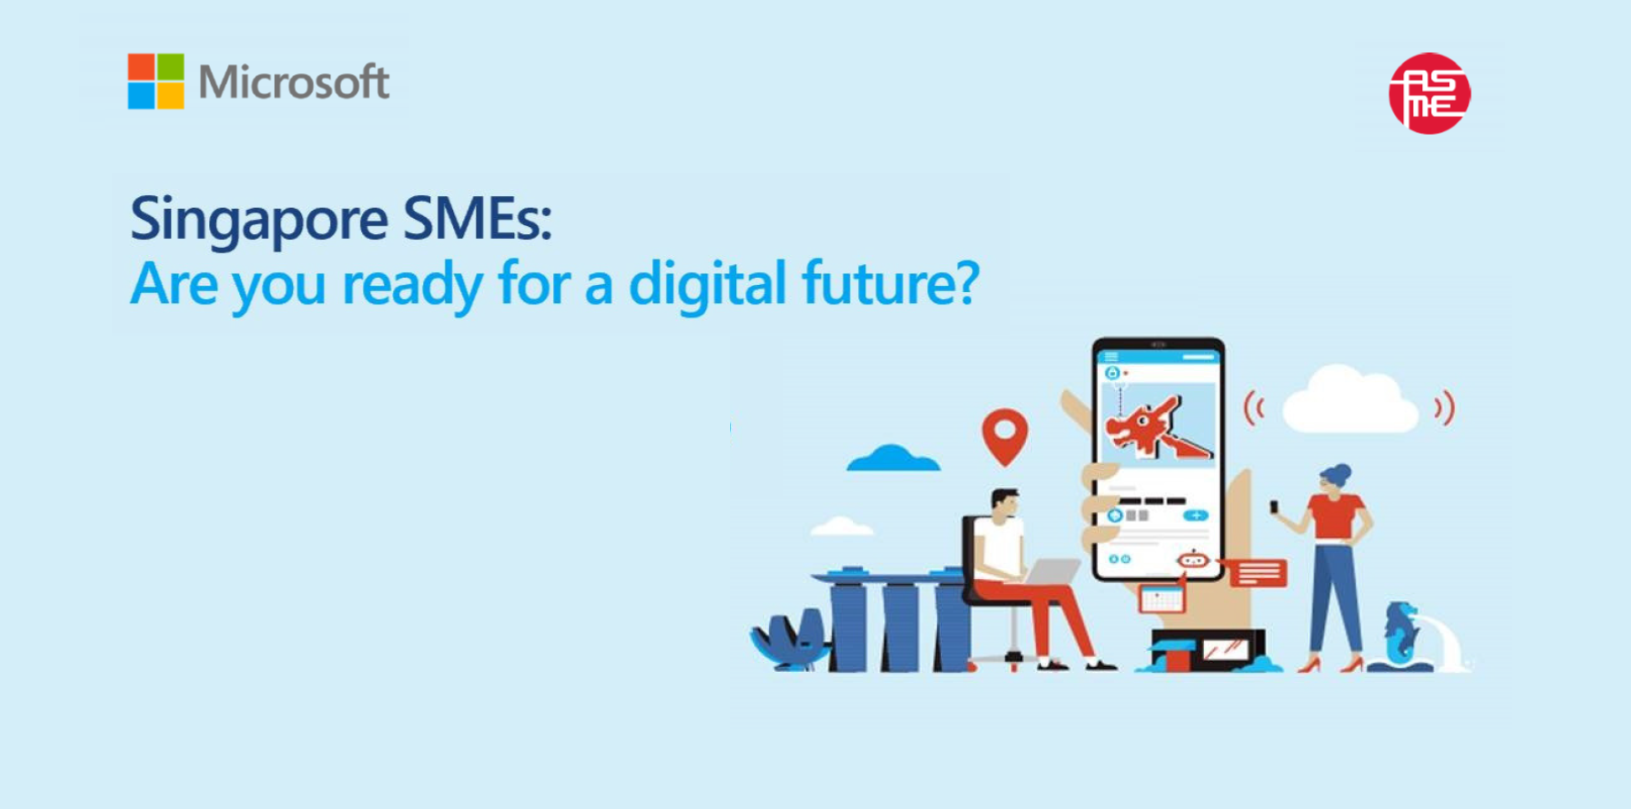 Singapore SMEs: Are you ready for a digital future?